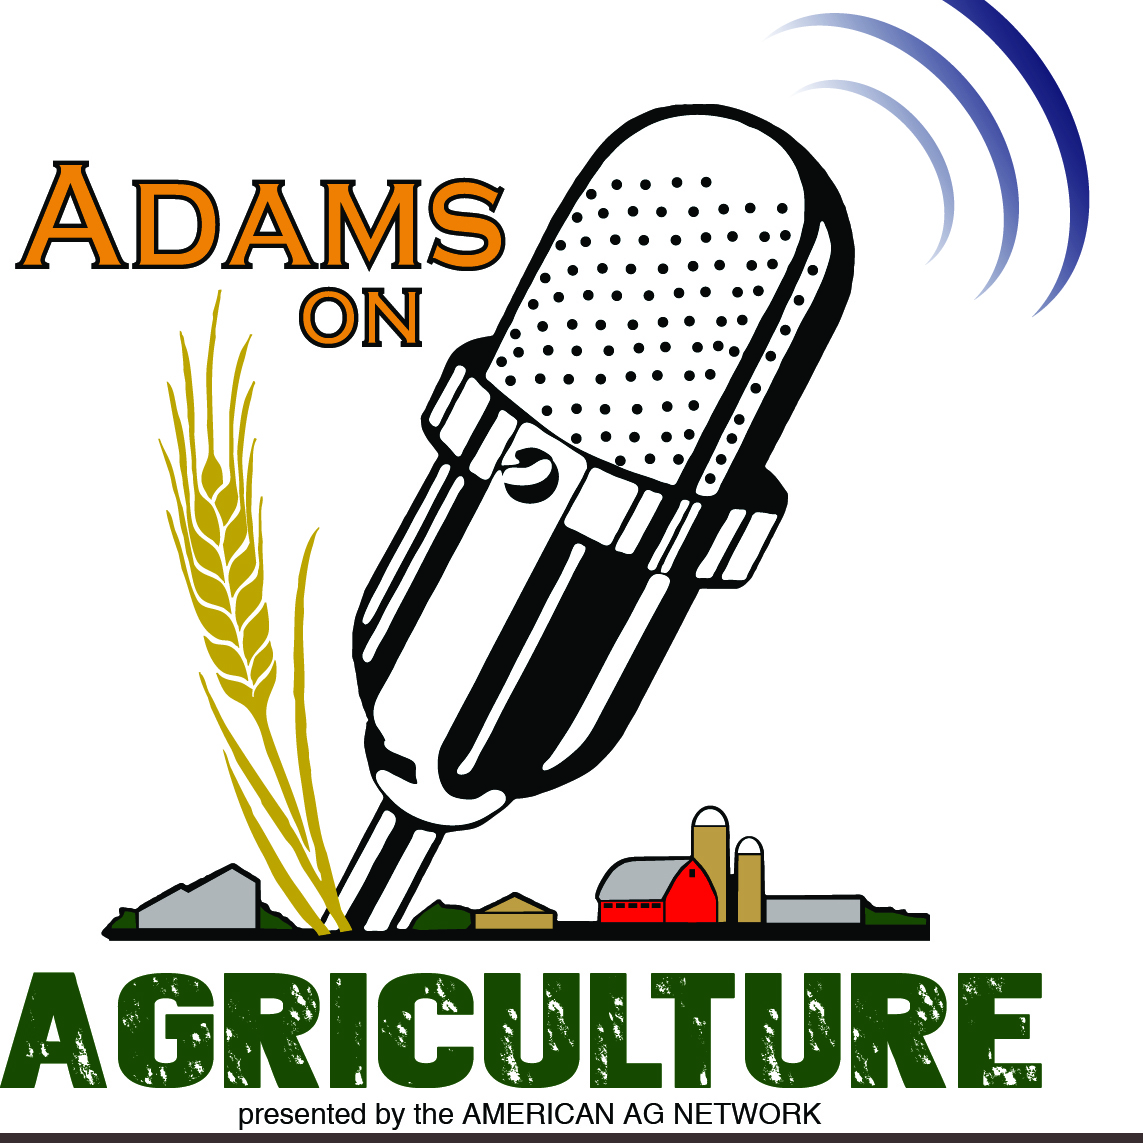 Adams on Agriculture - March 14, 2018